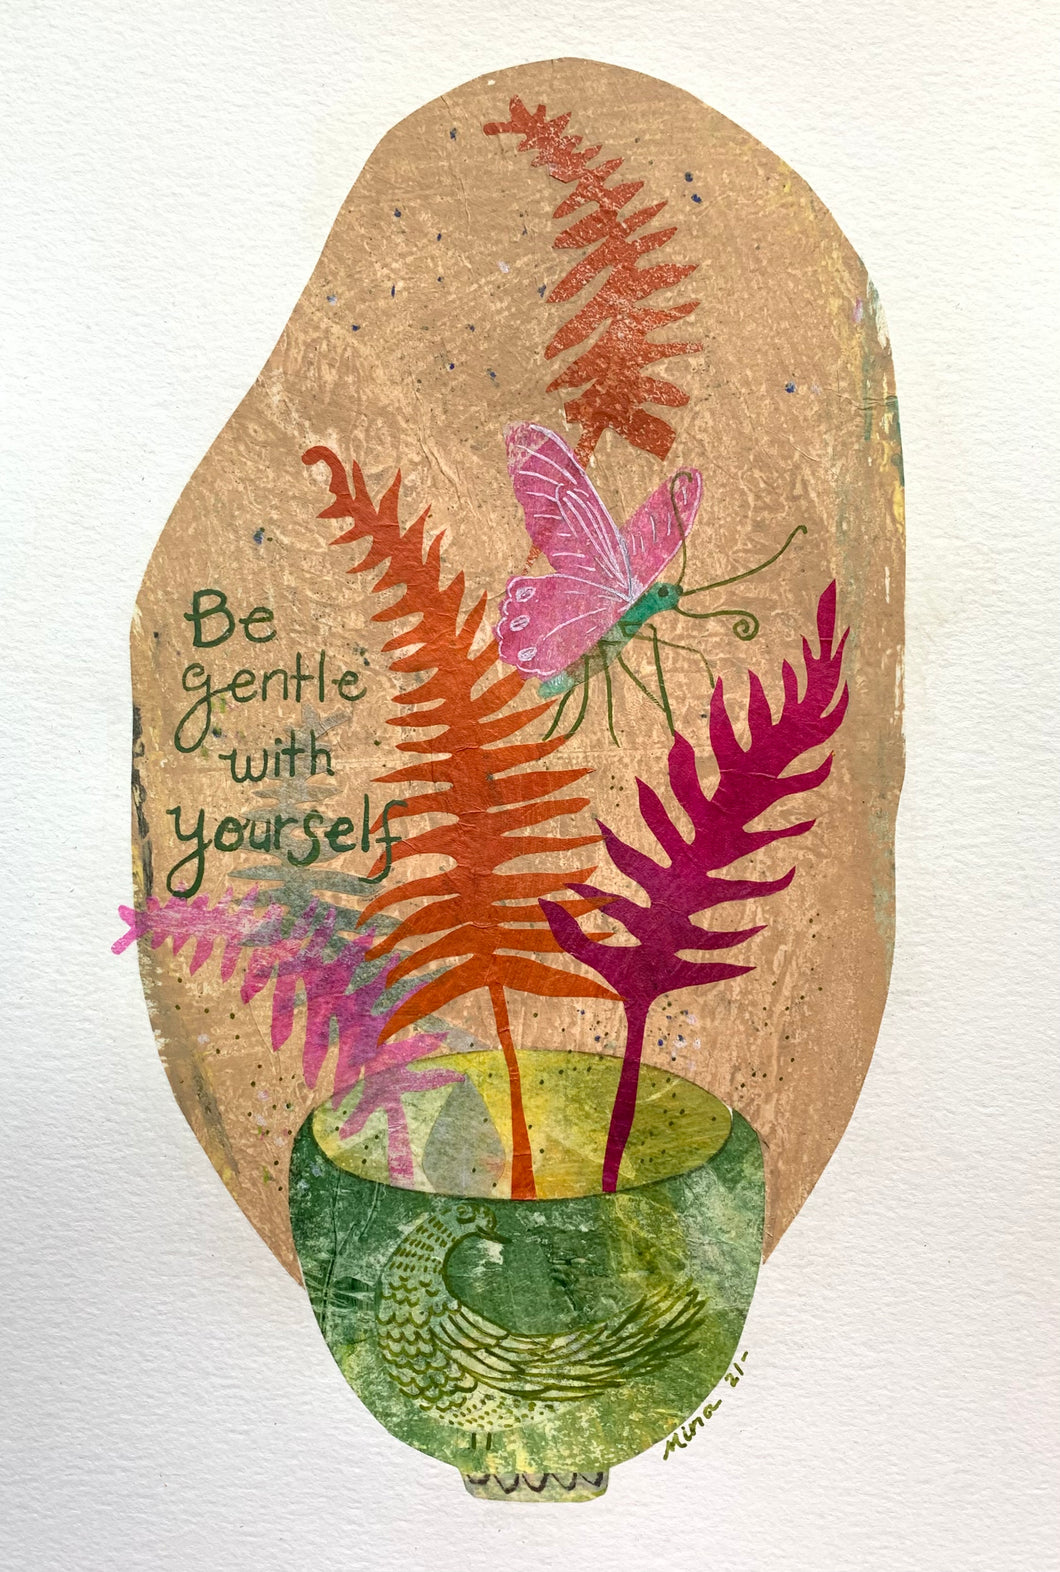 Original Collage “Be gentle with yourself”